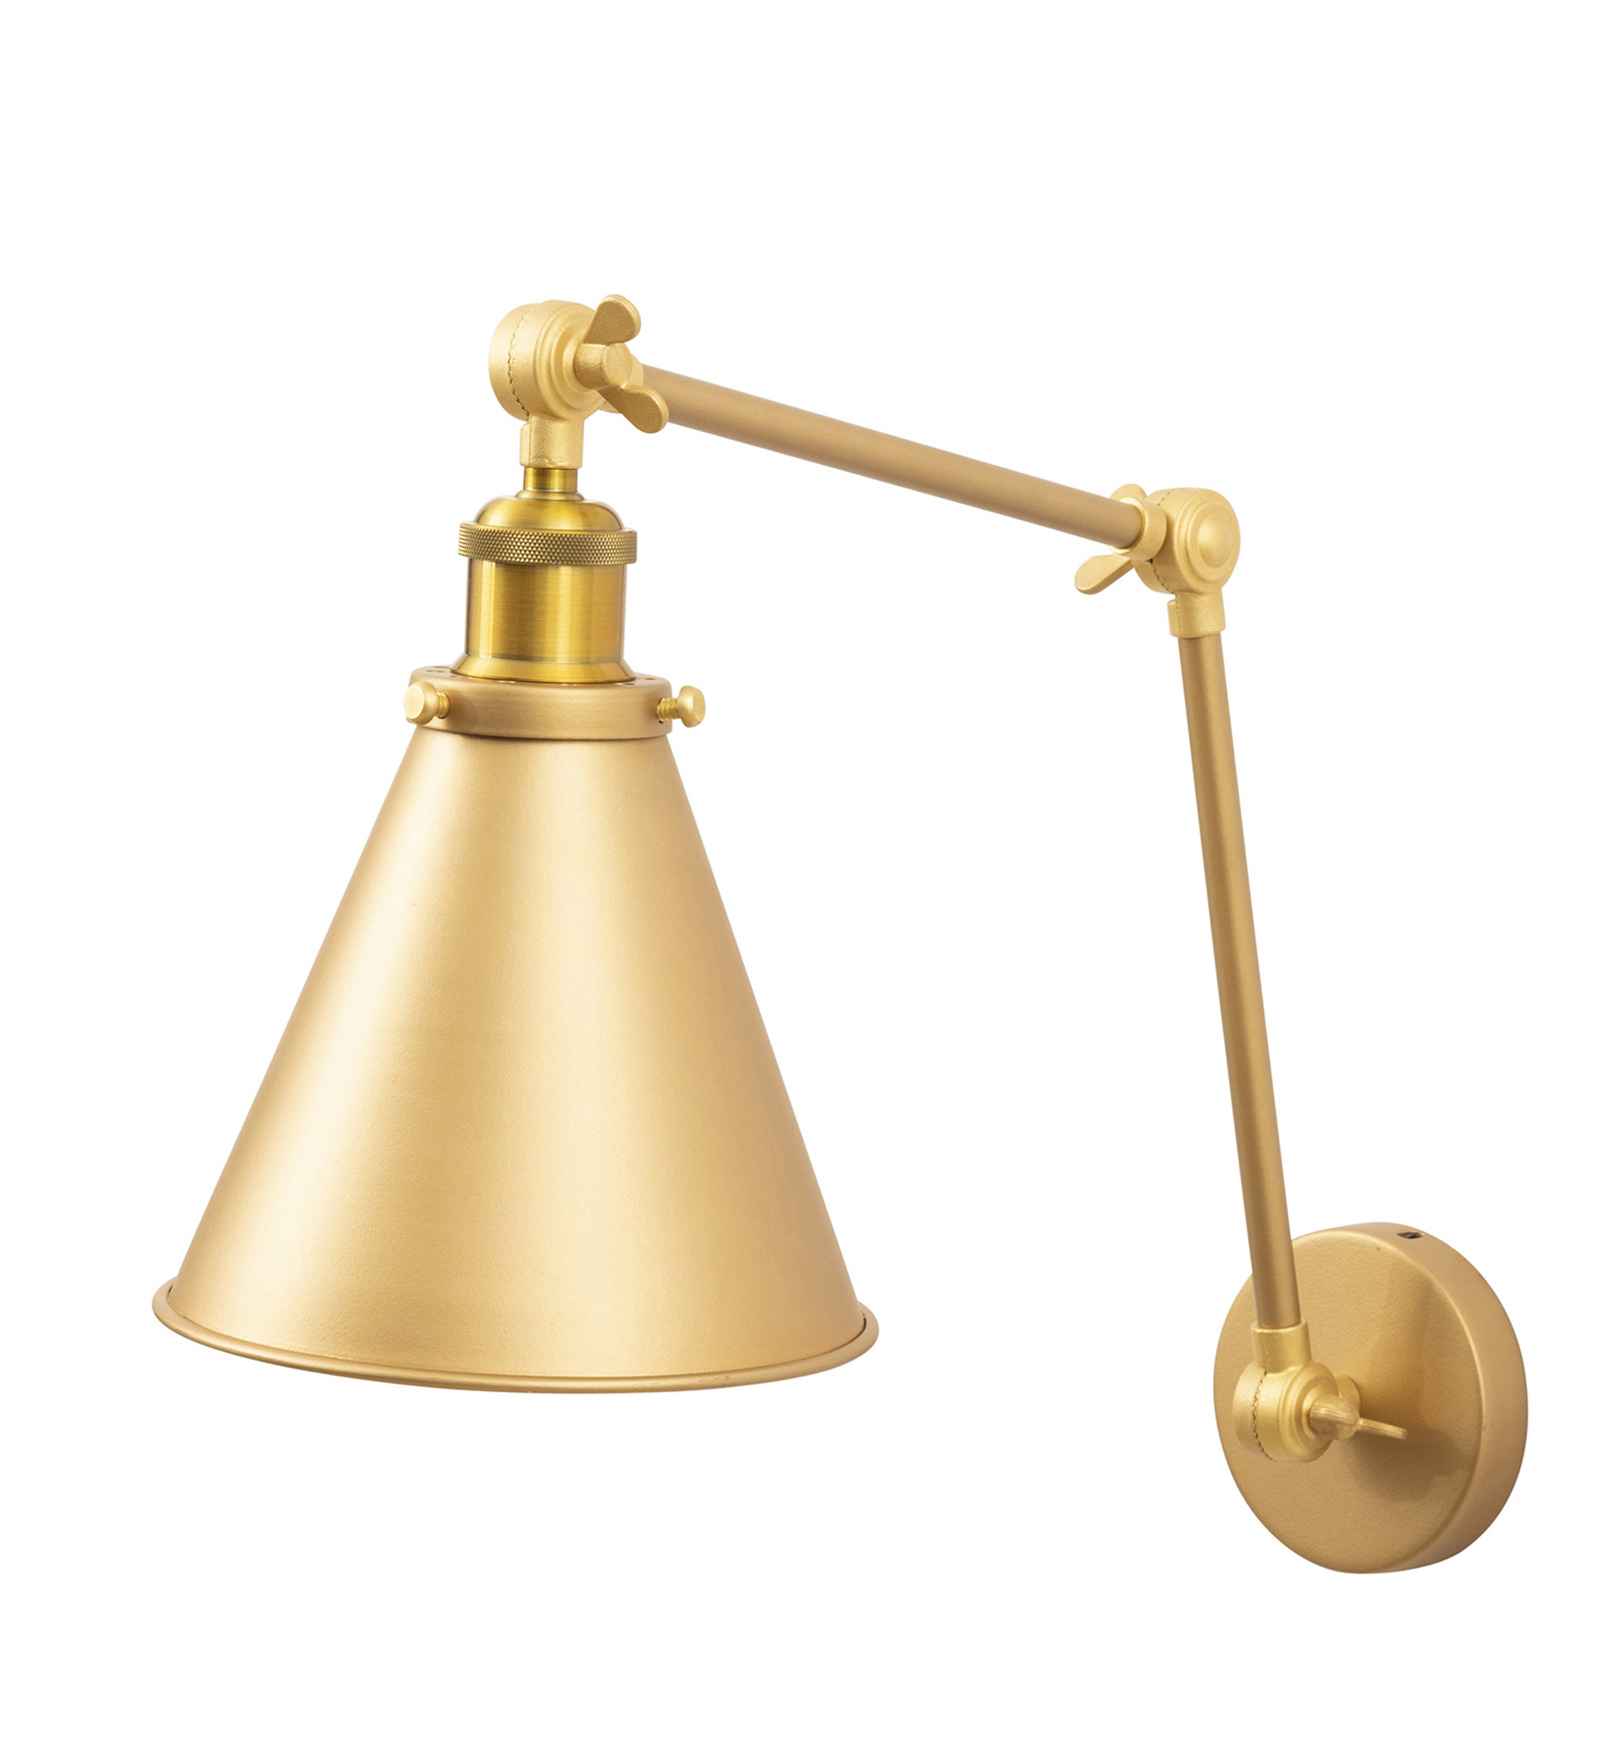 Mimmic Gold Wall Sconce